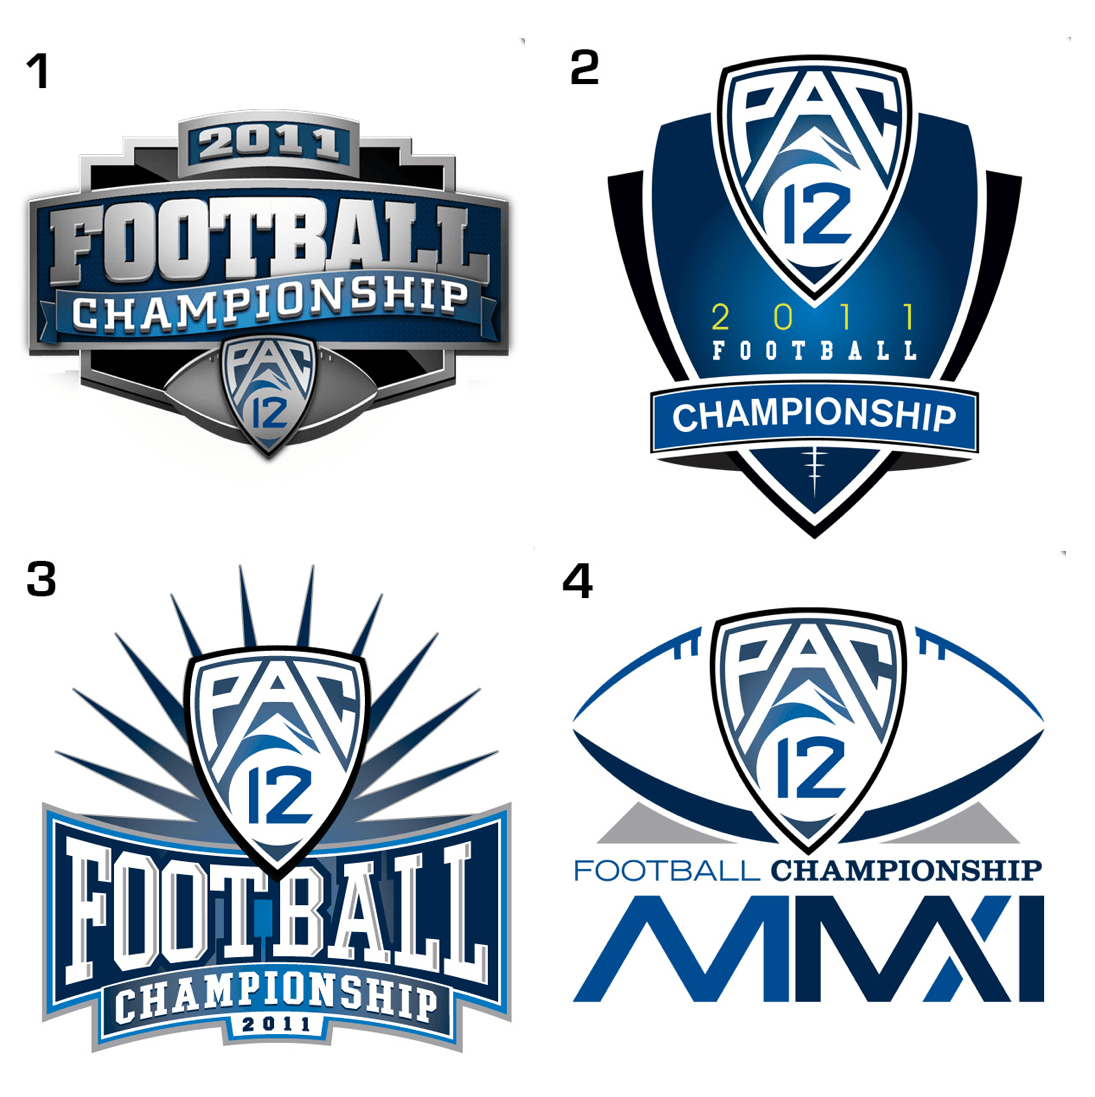 Championship Logo - Vote for the Pac-12 Conference Championship Logo!